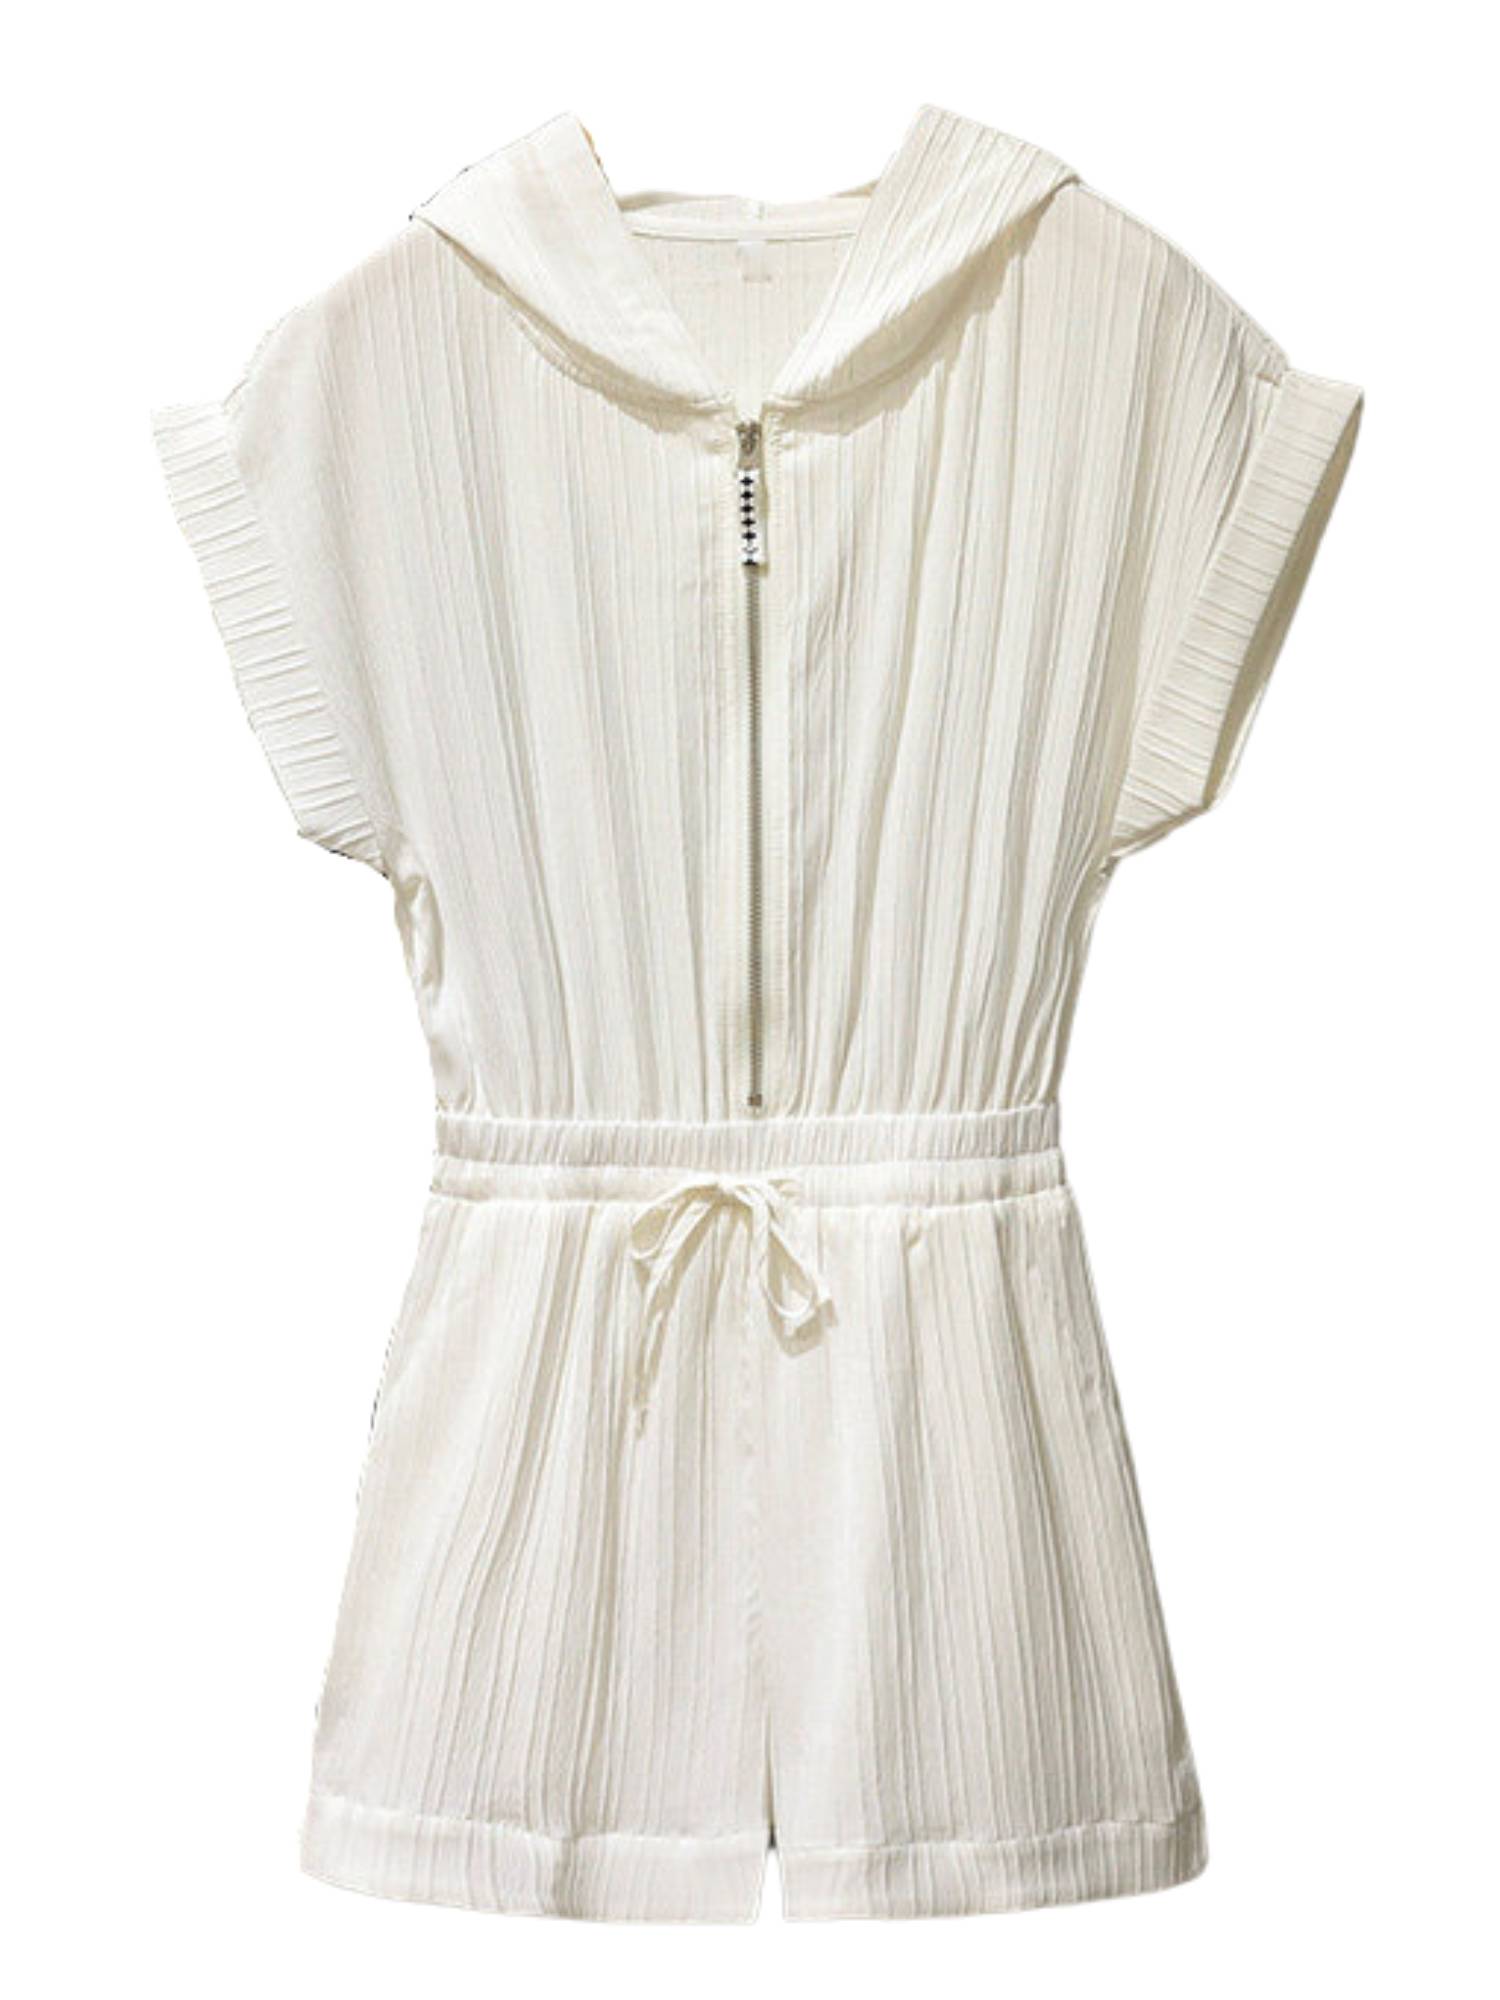 'Frances' Ribbed Hooded Romper (4 Colors)
 